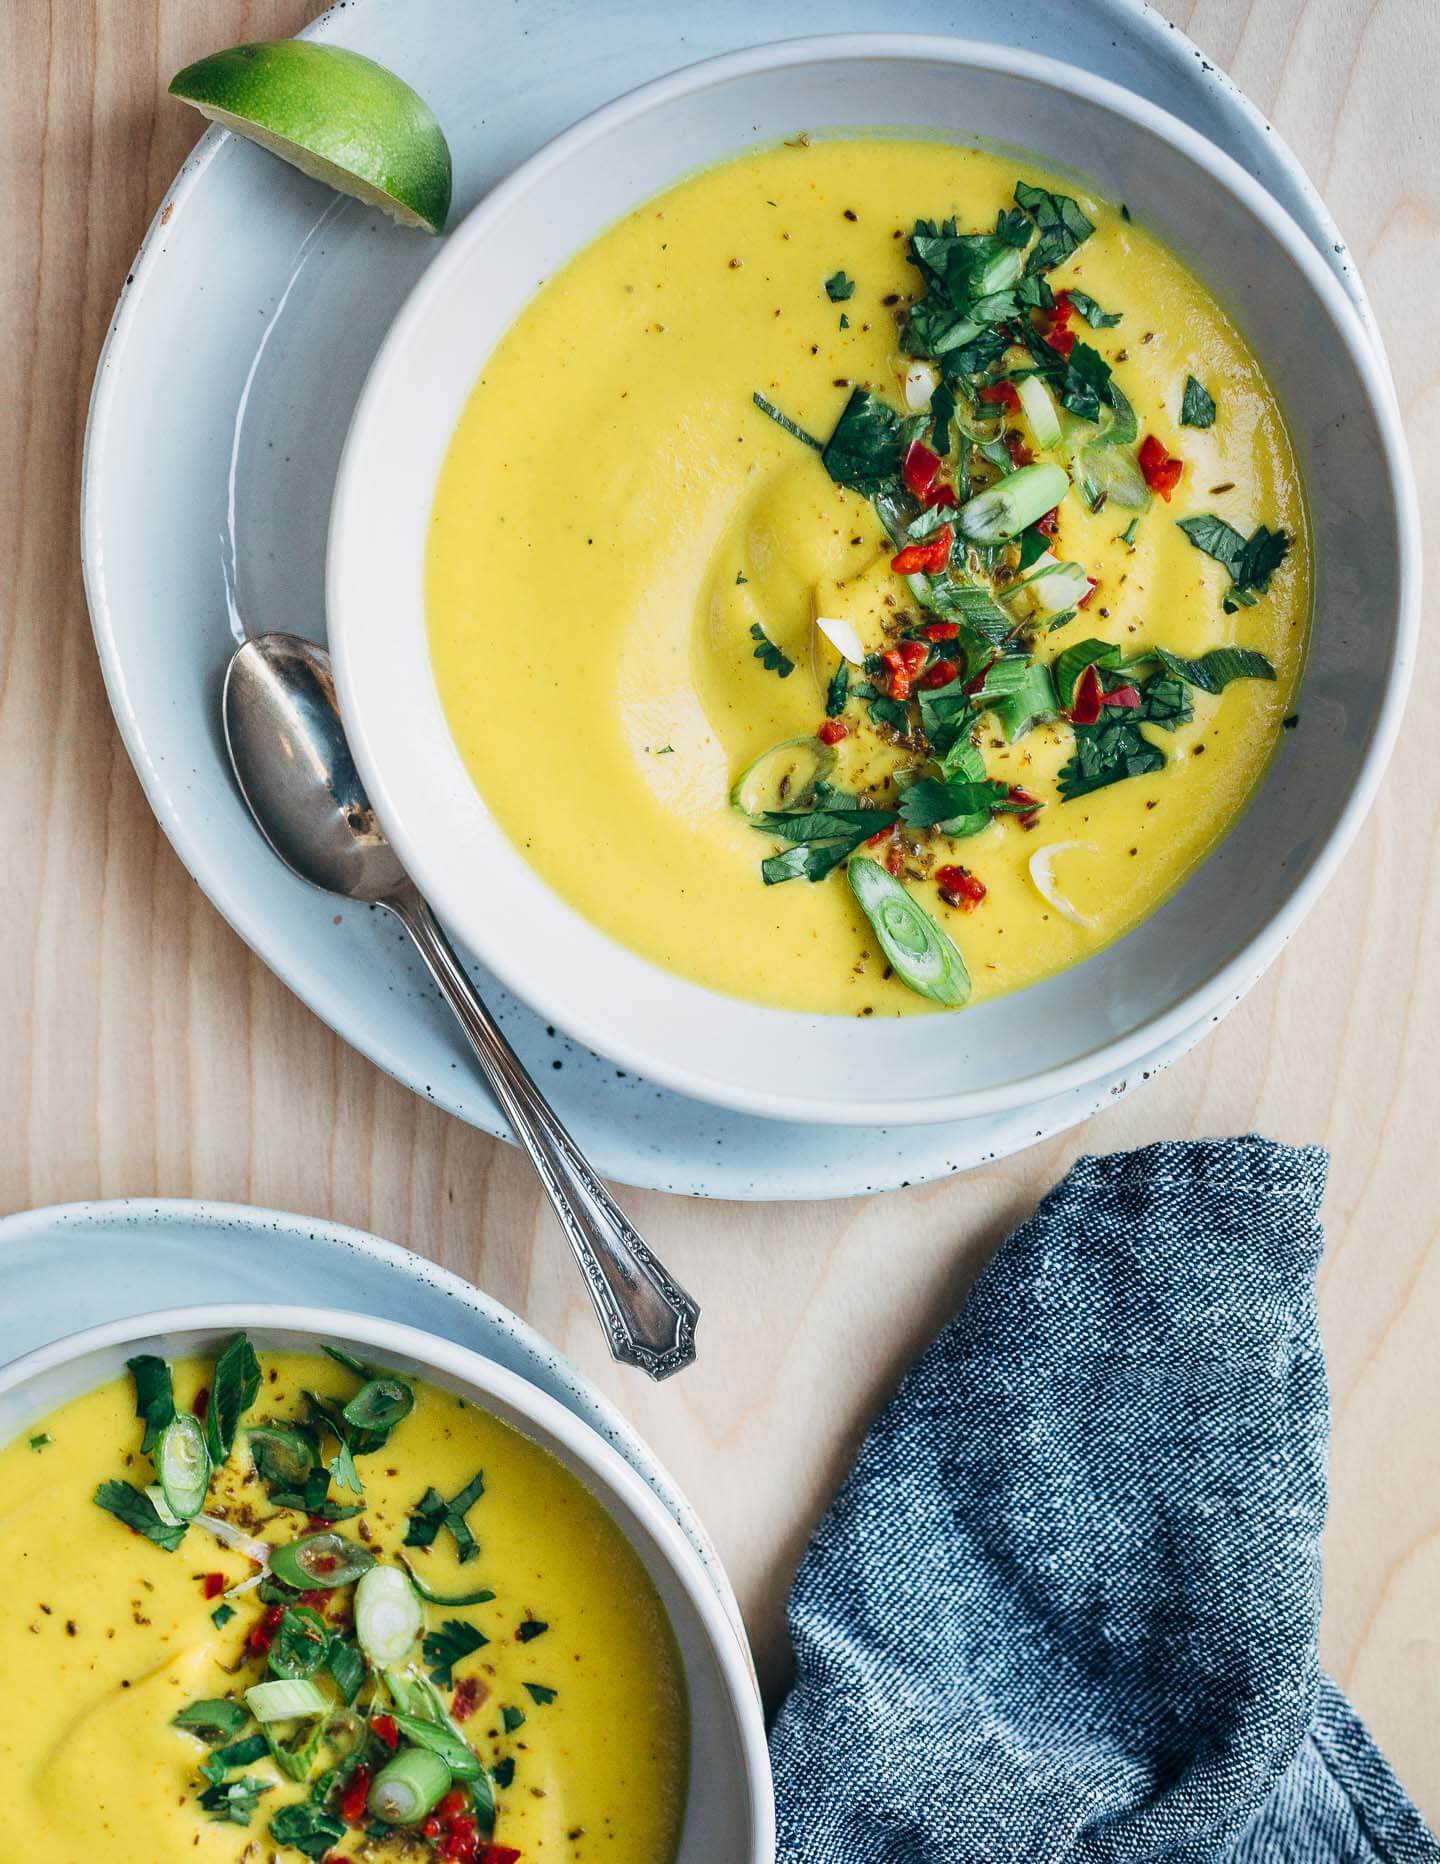 Vibrant flavors and stovetop ease make this simple cauliflower soup with turmeric and cumin an ideal counterpoint to winter's chill.